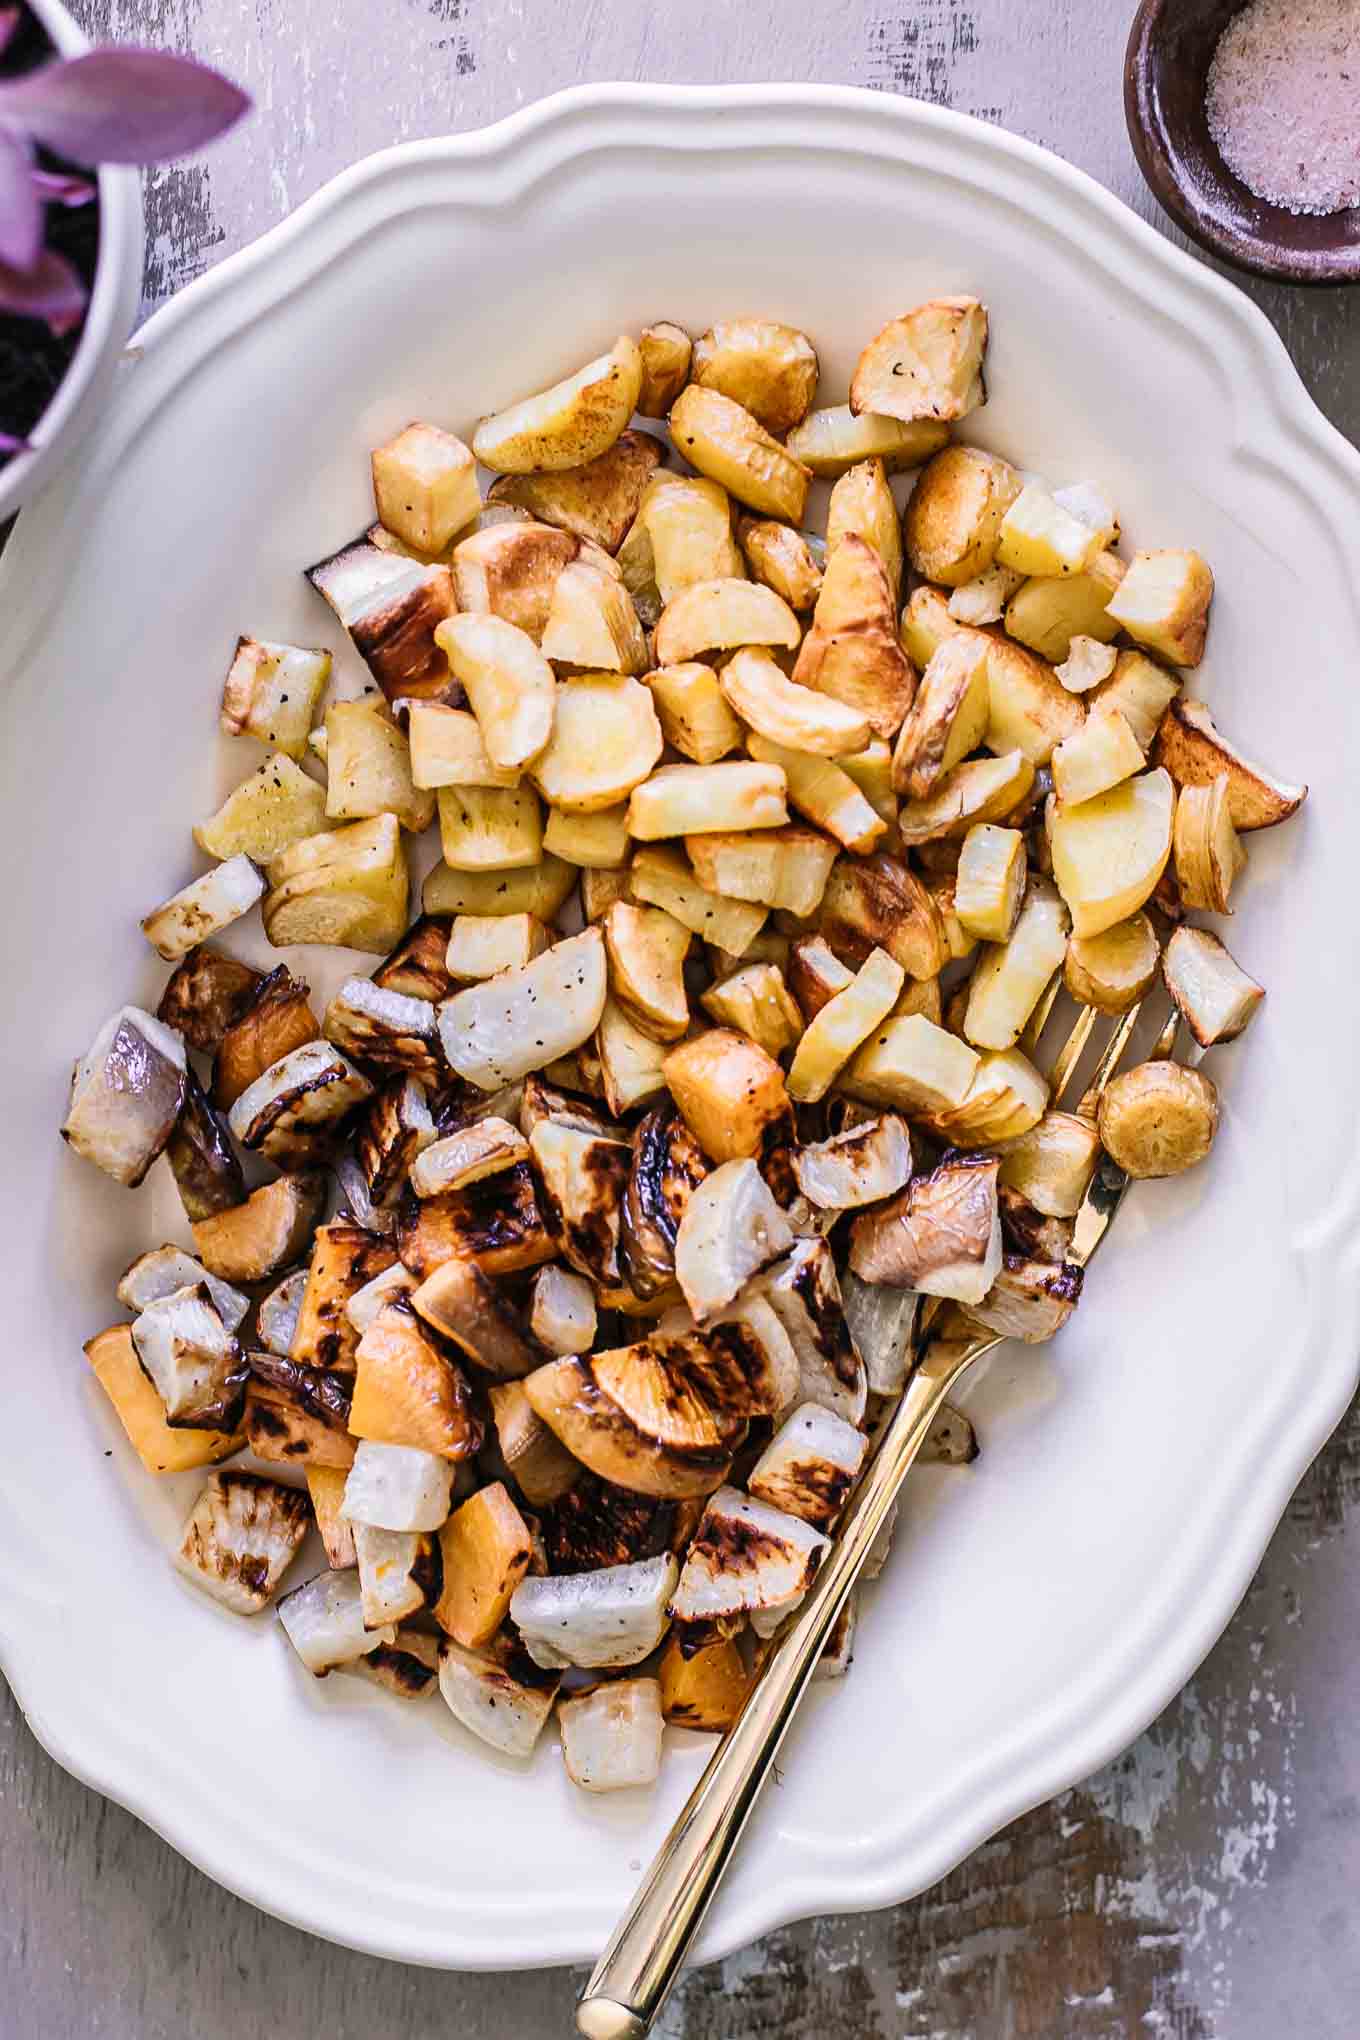 Roasted Parsnips and Turnips